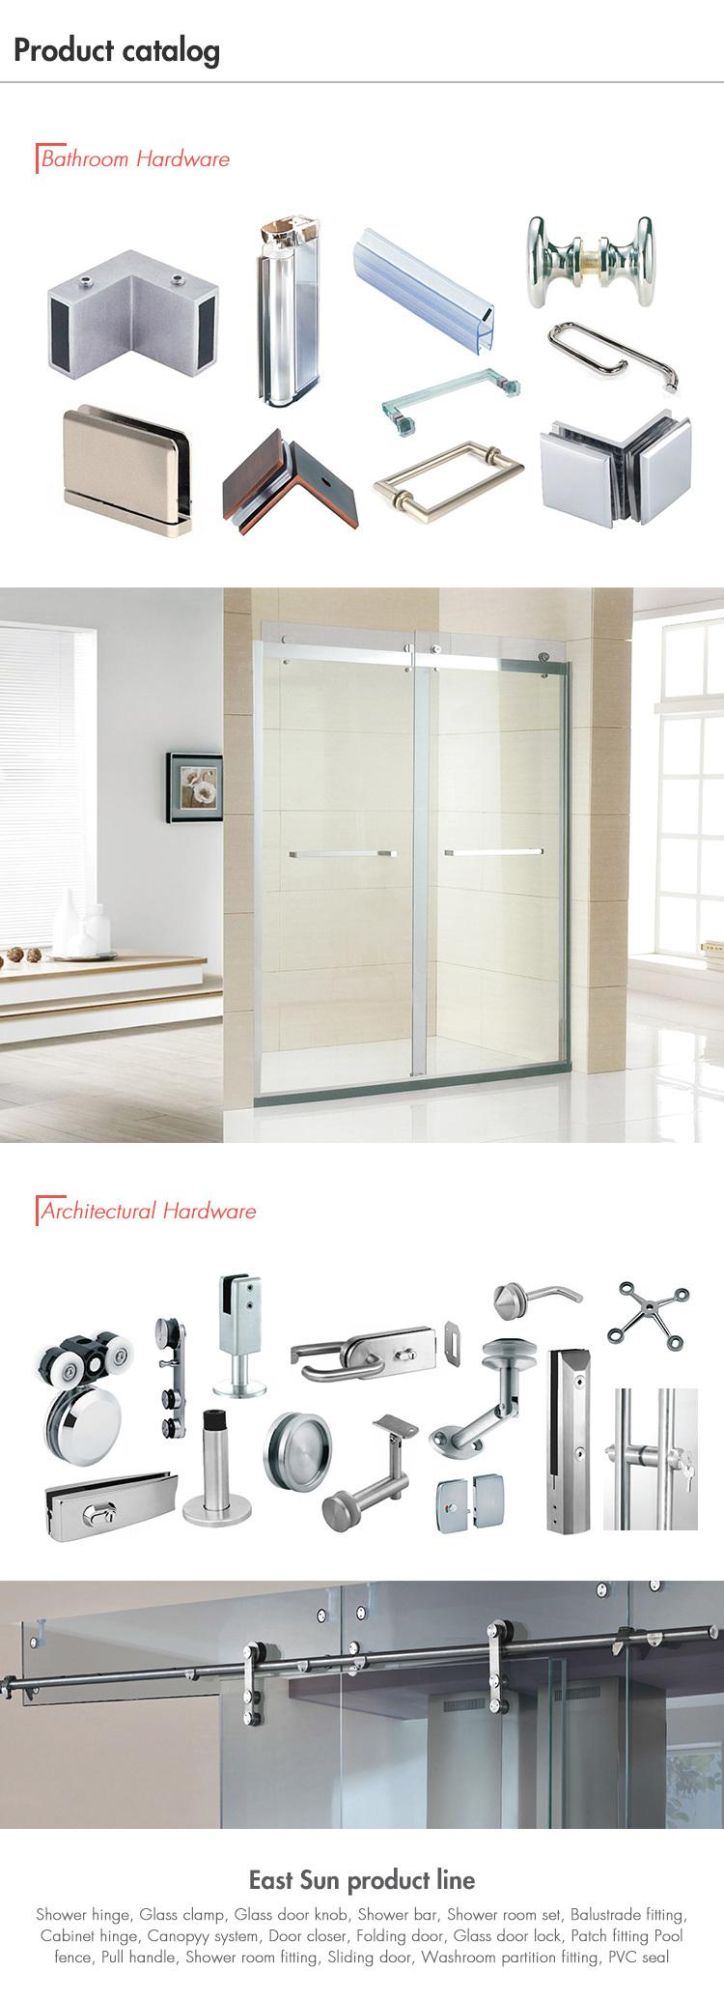 Commercial Entrance Security Glass Door Pull Handle Cabinet Hardware (pH-071)